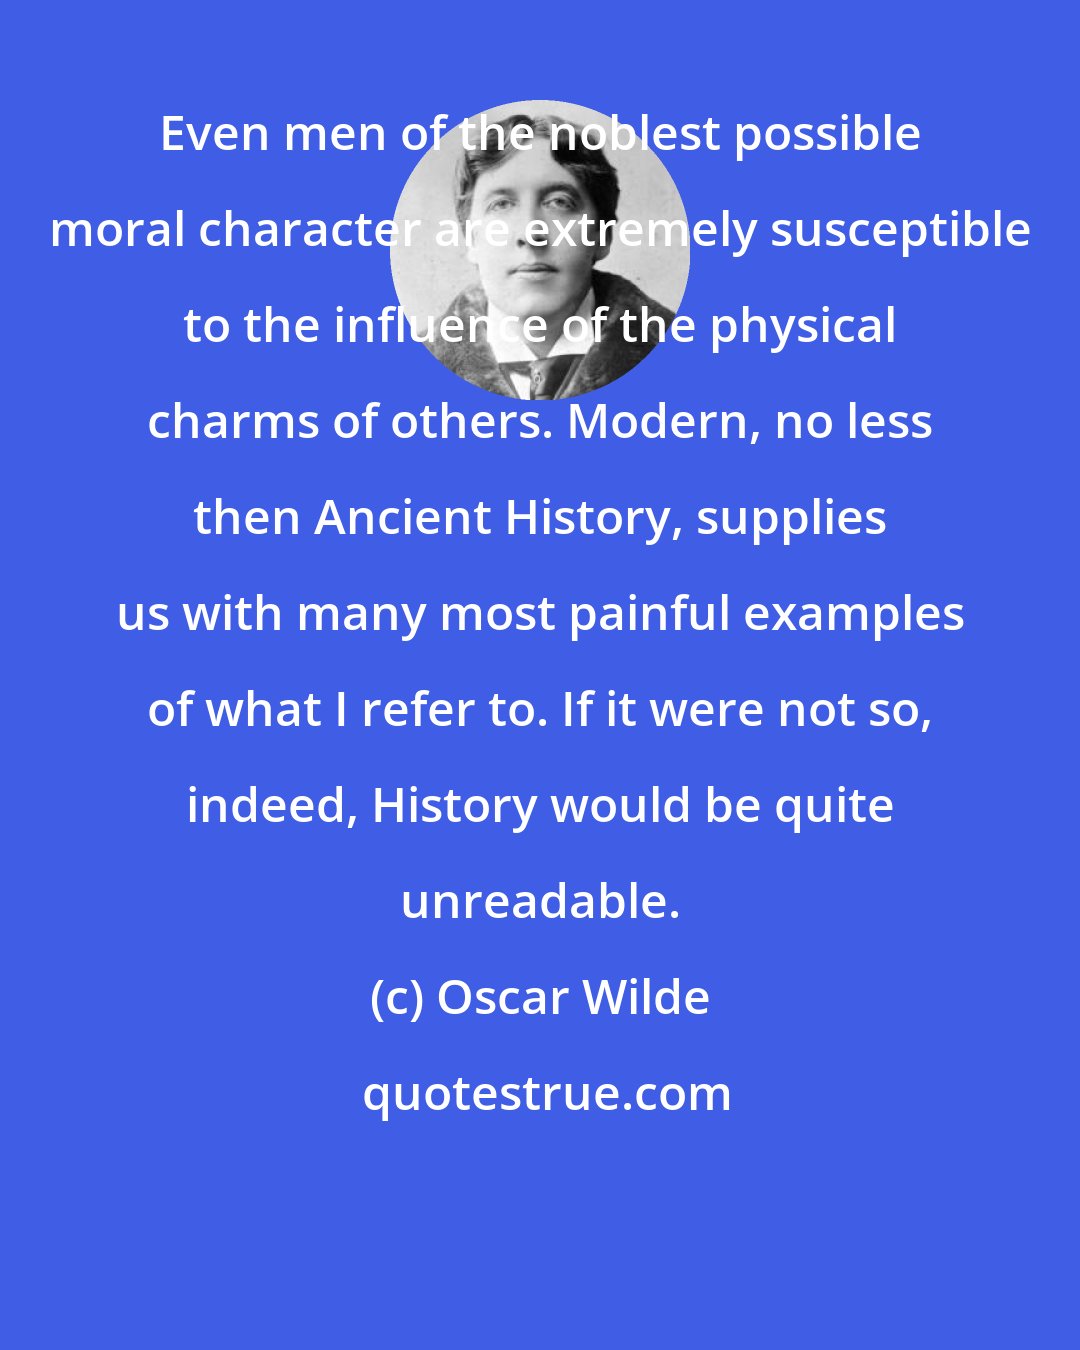 Oscar Wilde: Even men of the noblest possible moral character are extremely susceptible to the influence of the physical charms of others. Modern, no less then Ancient History, supplies us with many most painful examples of what I refer to. If it were not so, indeed, History would be quite unreadable.